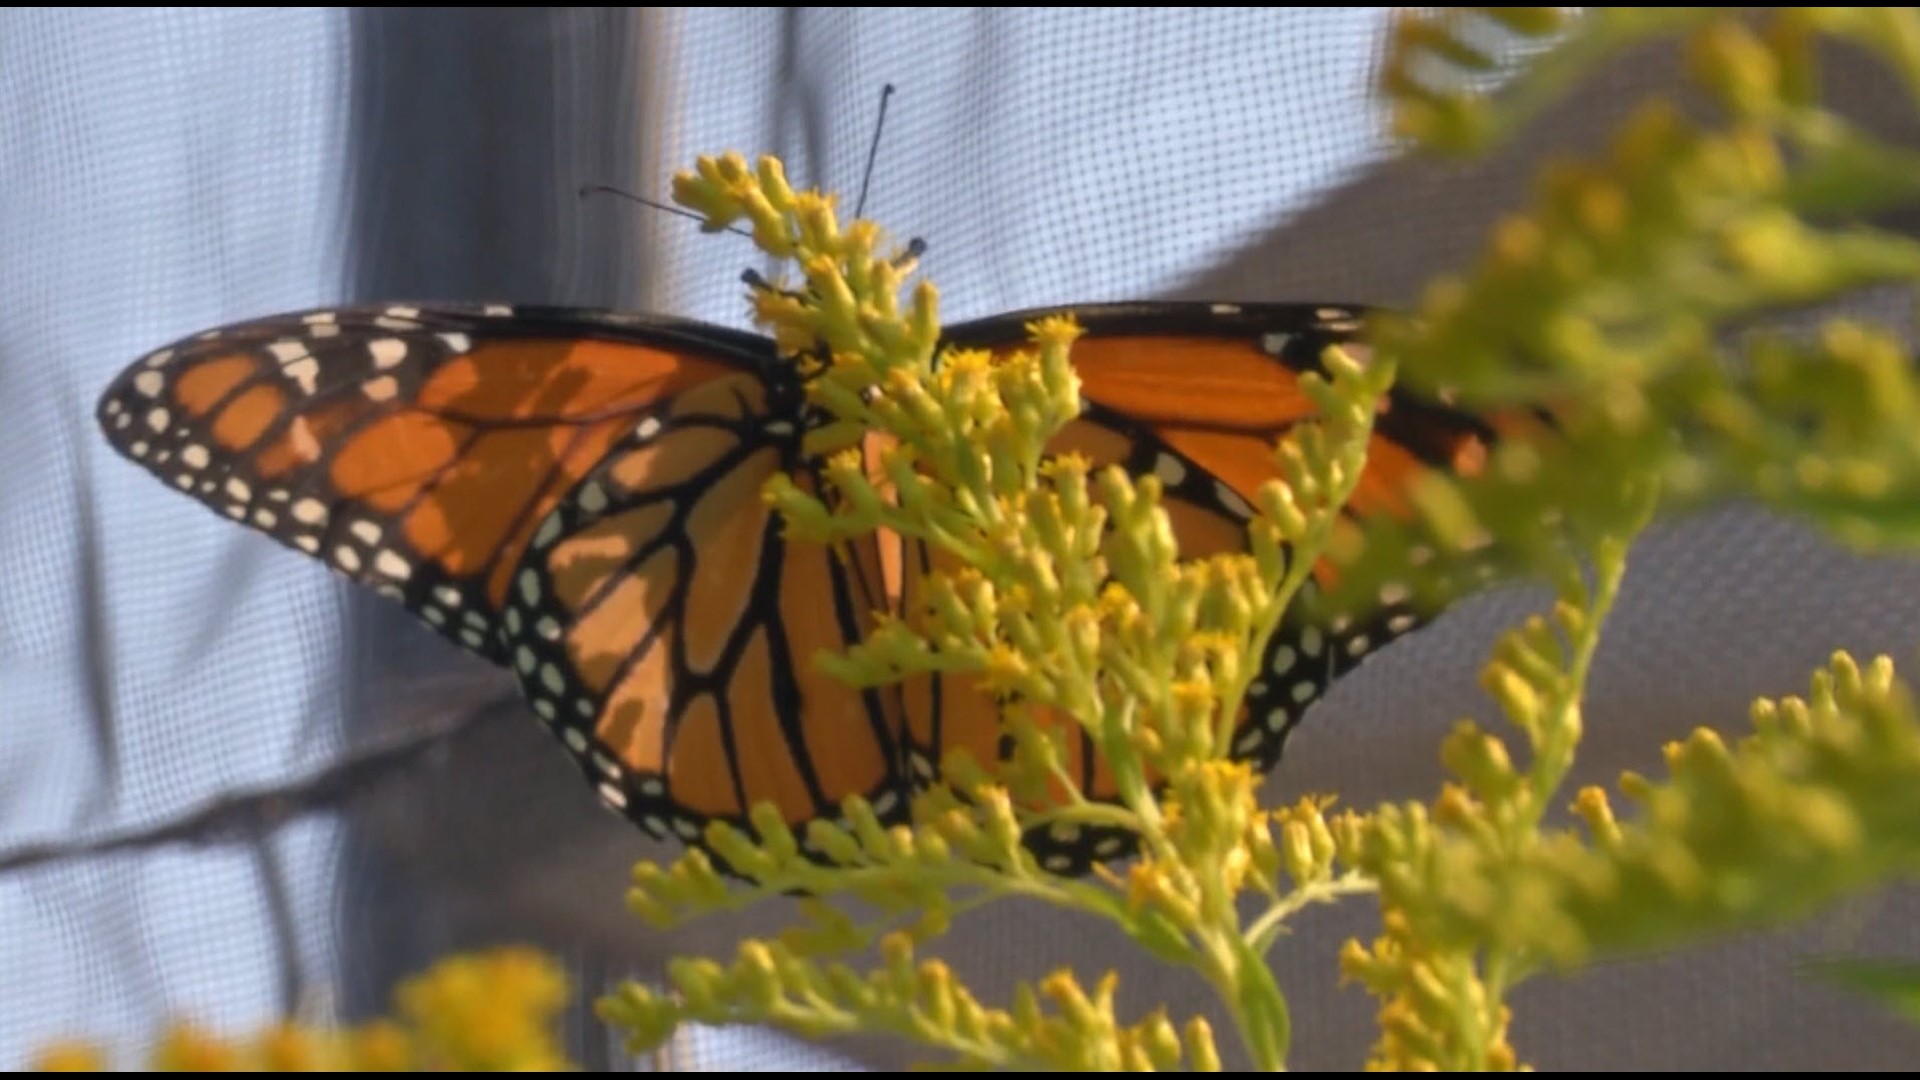 "We have 100,00 Monarch's this year compared to 2,000 last year," Edenholn said about the California totals so far.